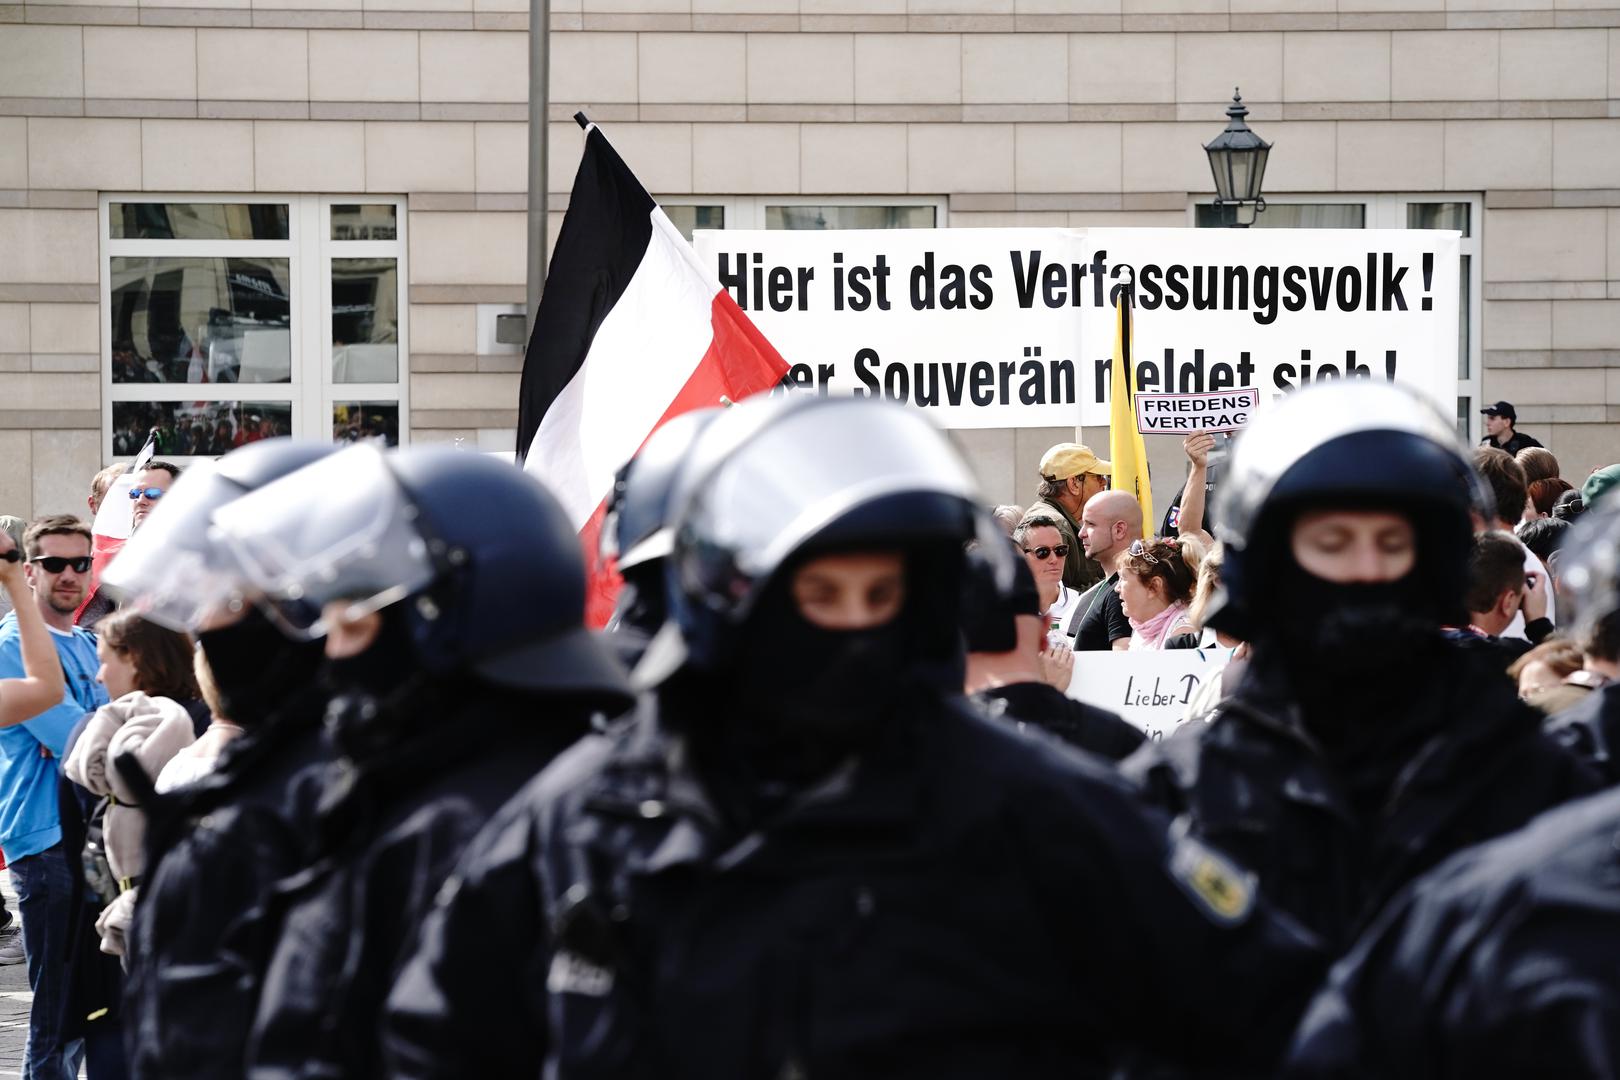 29 August 2020, Berlin: Participants gather behind police officers for a demonstration against the Corona measures. Photo: Kay Nietfeld/dpa /DPA/PIXSELL